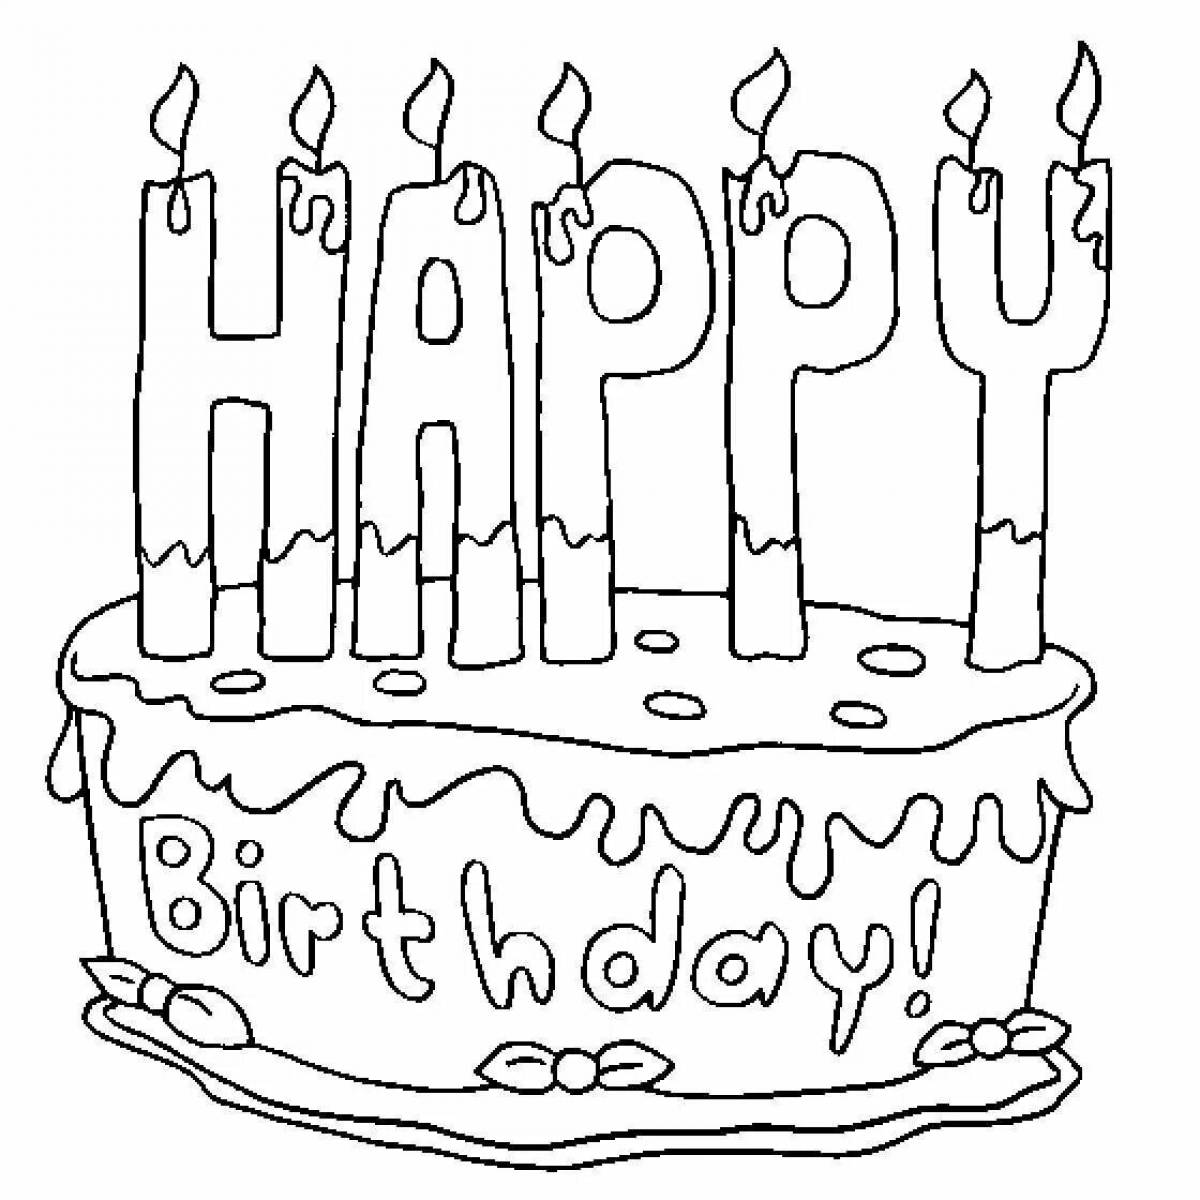 Happy birthday sister coloring page